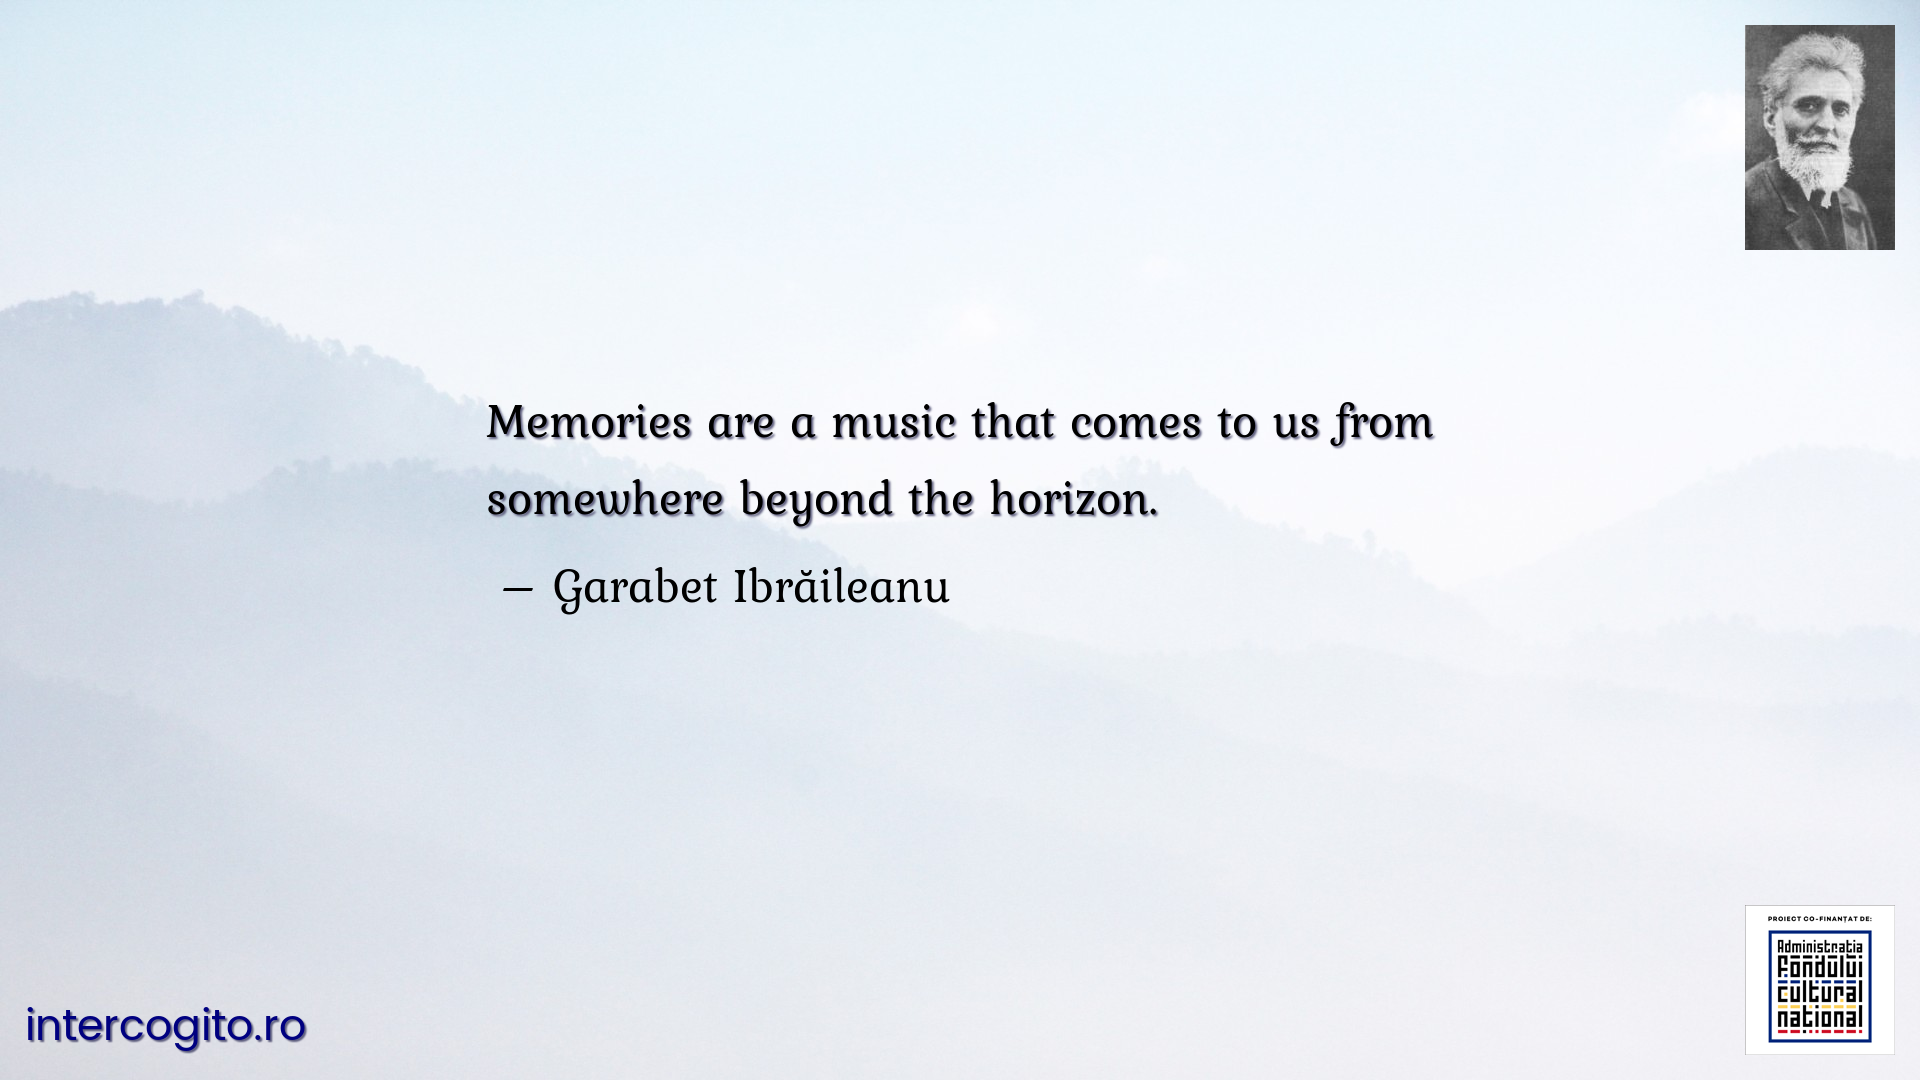 Memories are a music that comes to us from somewhere beyond the horizon.